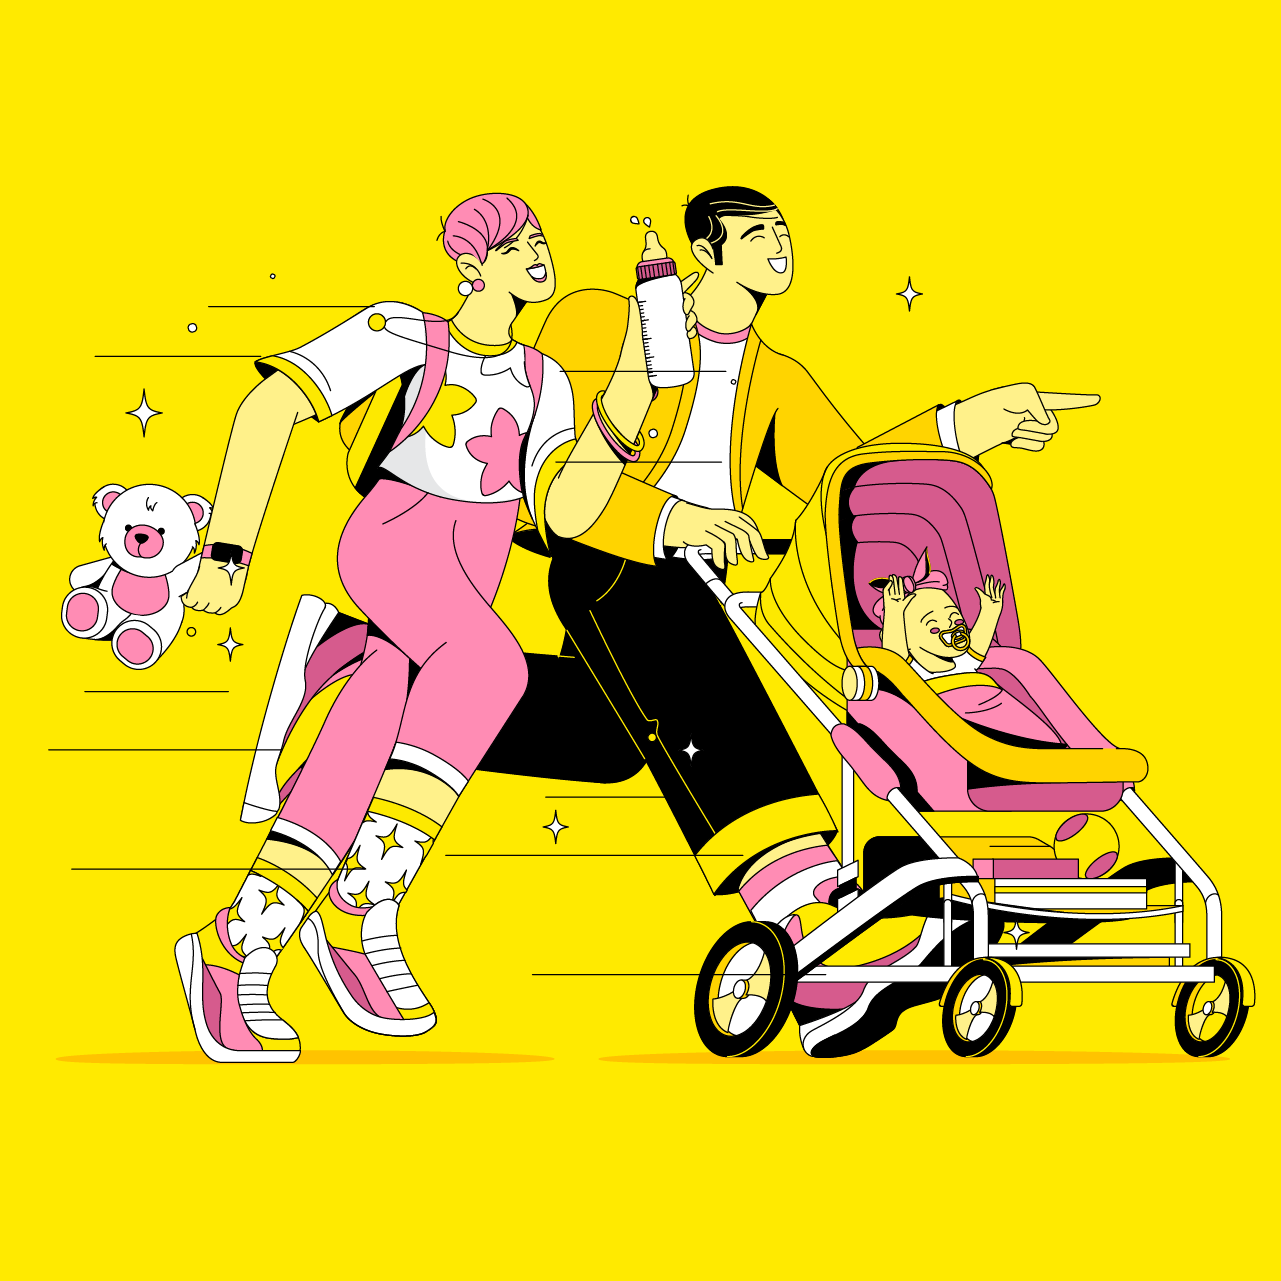 Artifact from the Scoot Airlines Illustration Showcase article on Abduzeedo